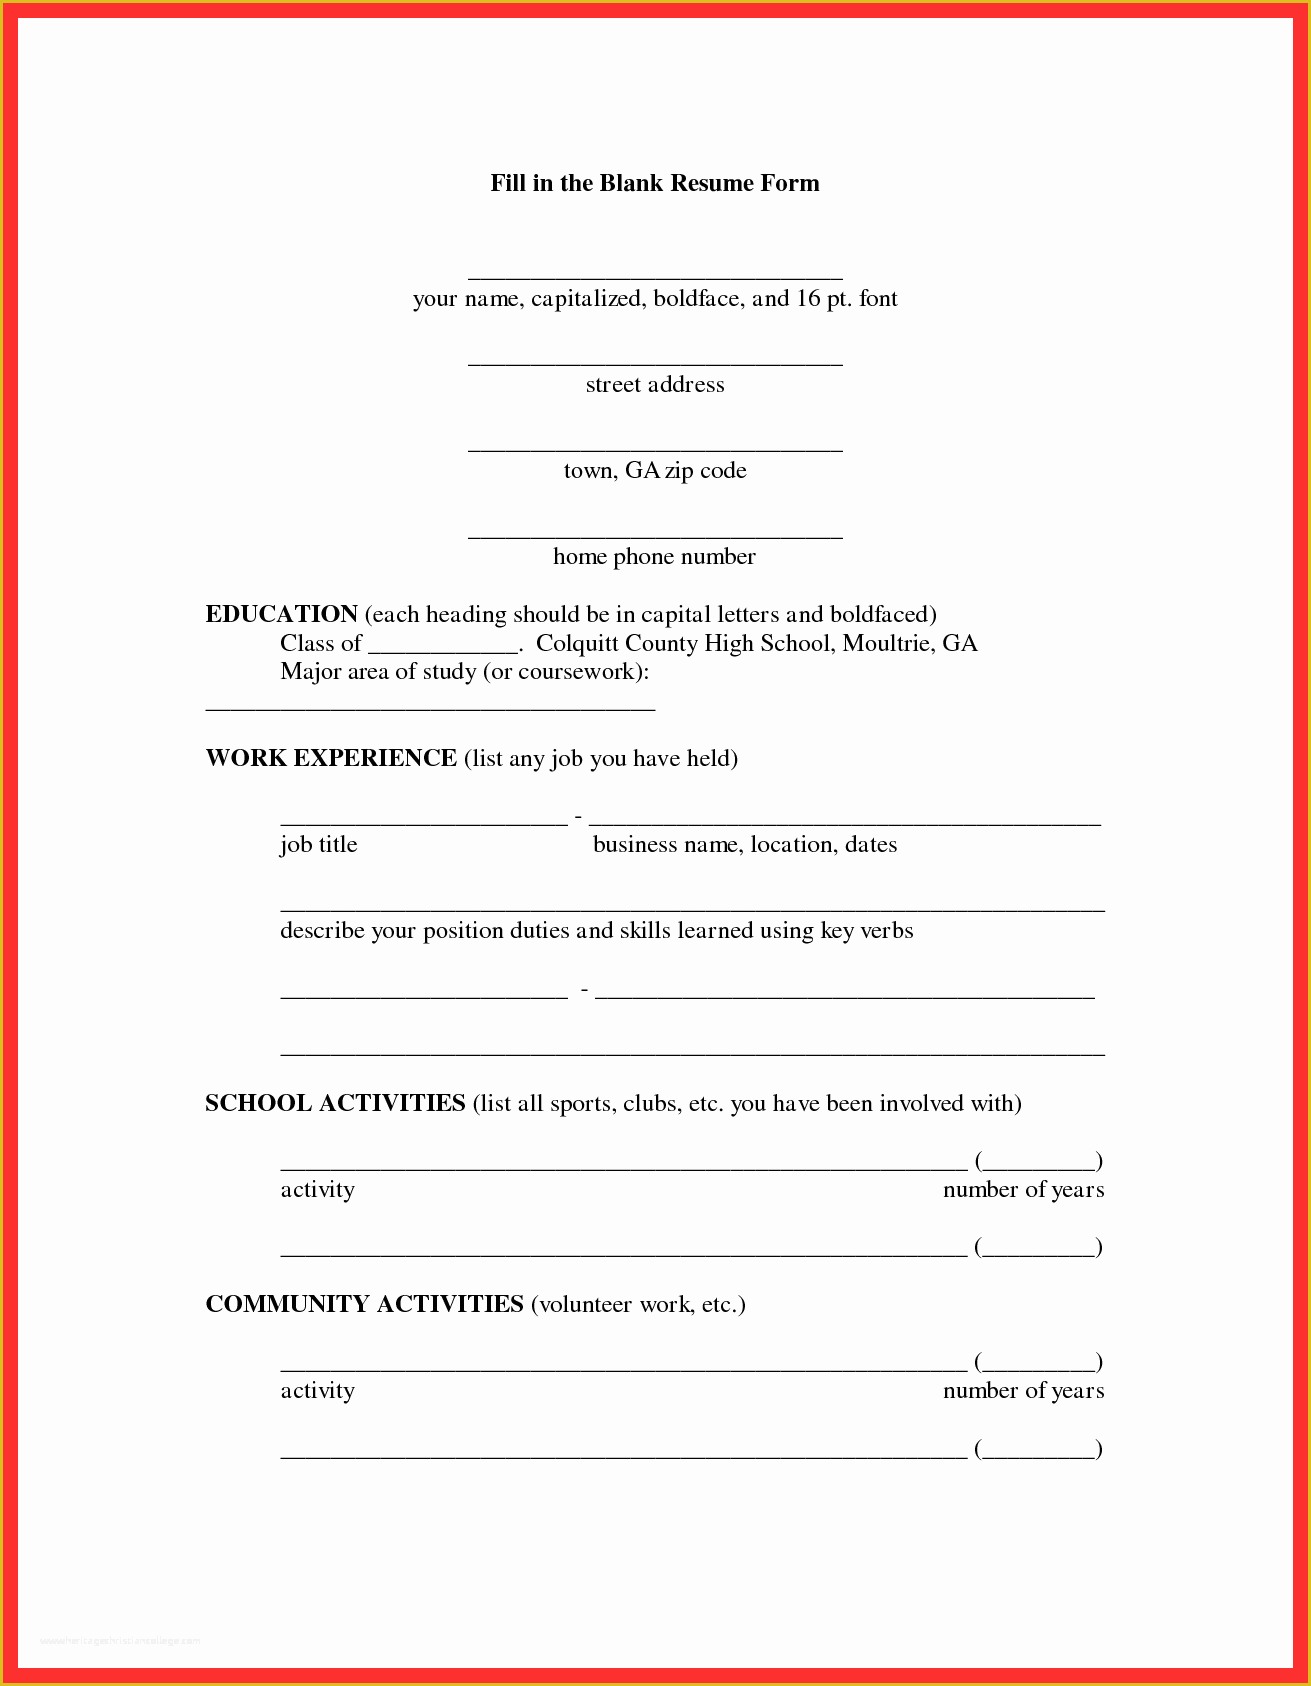 Free Resume Templates Pdf Of Fill In Resume form